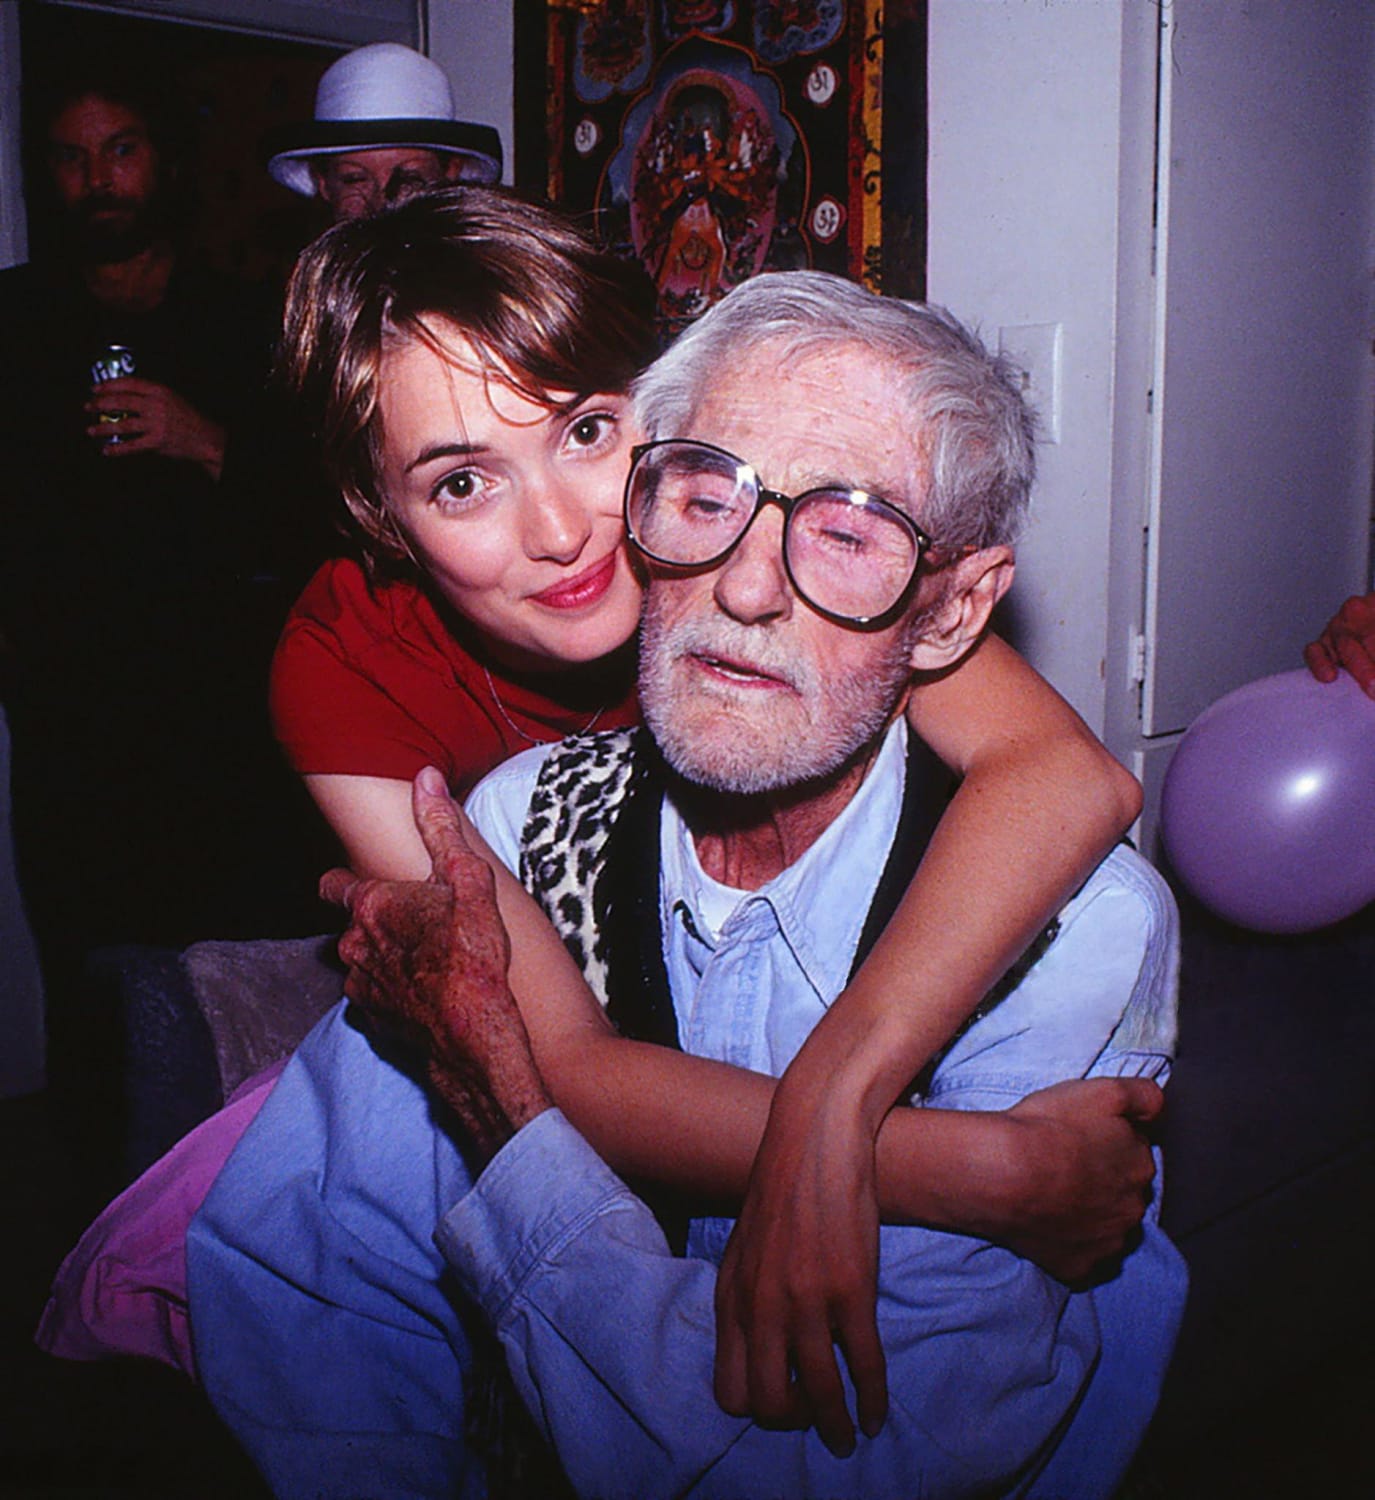 Winona Ryder embraces her godfather Timothy Leary at his home on Good Friday in Beverly Hills, 1996